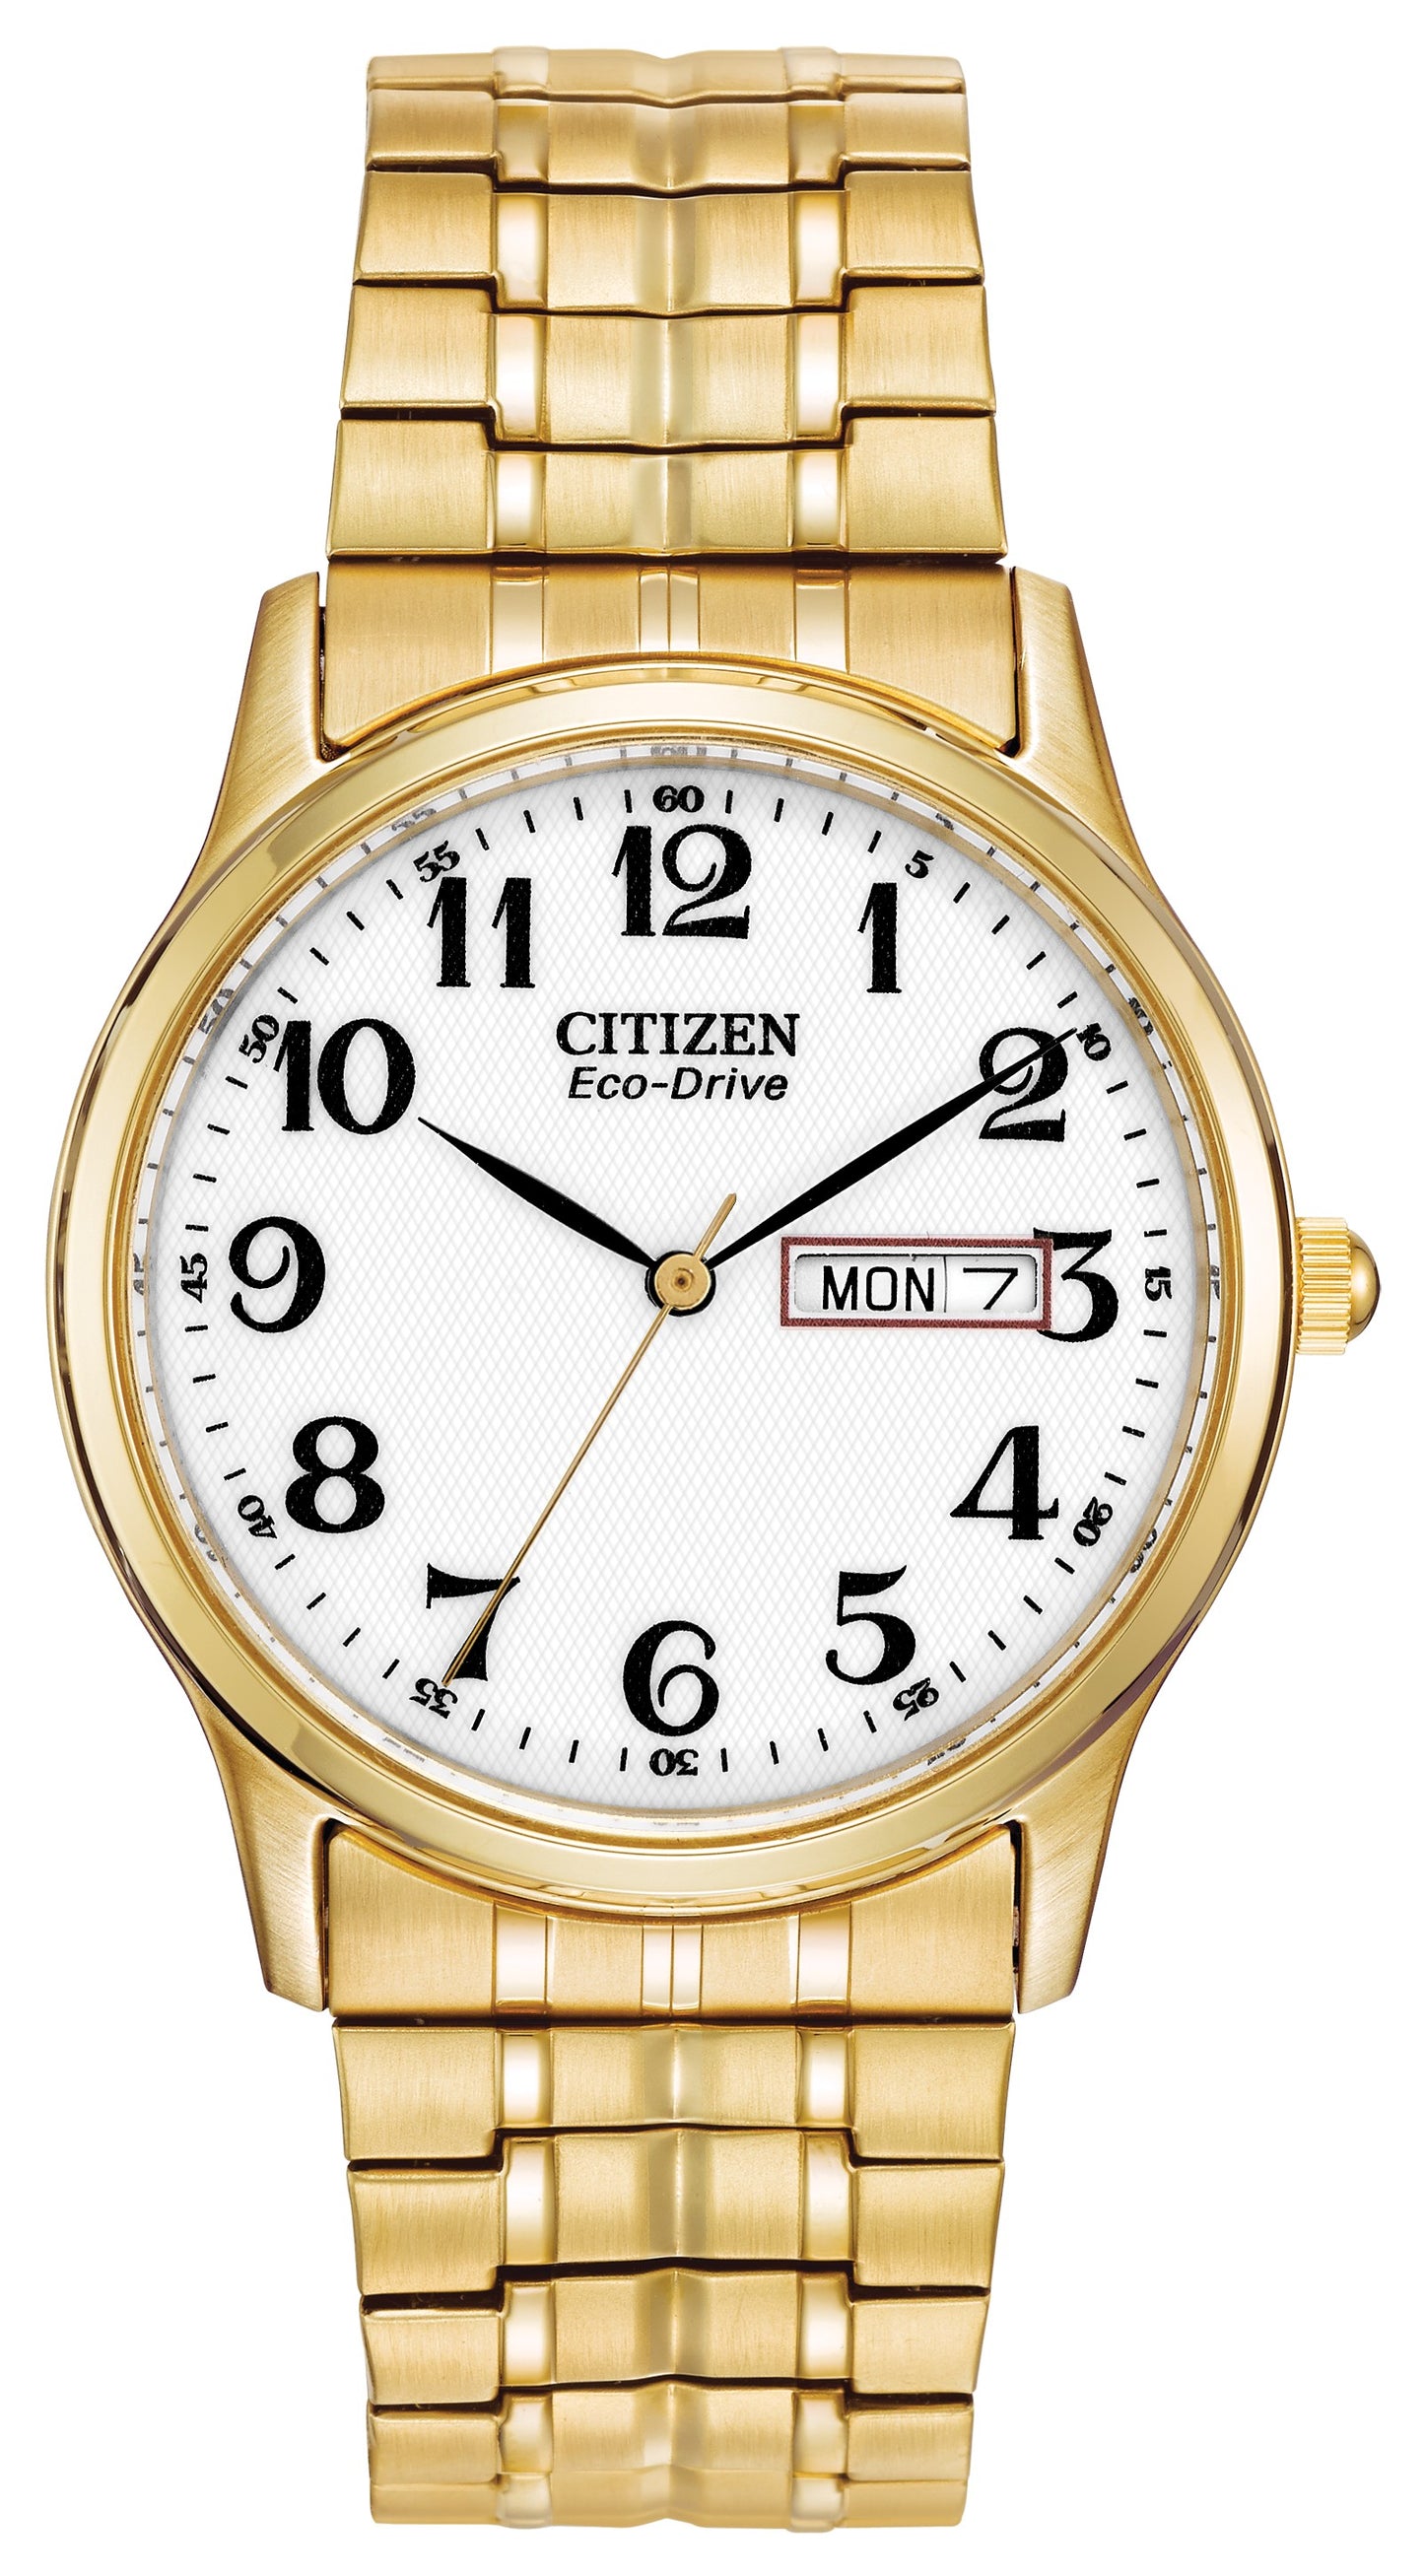 A classic design from Citizen that is both stylish and playful. The gold plated bracelet is gorgeous to look at and the crisp white dial is particularly elegant. Citizen Ecodrive, never requires a battery. The watch includes water resistance and a 36mm case.